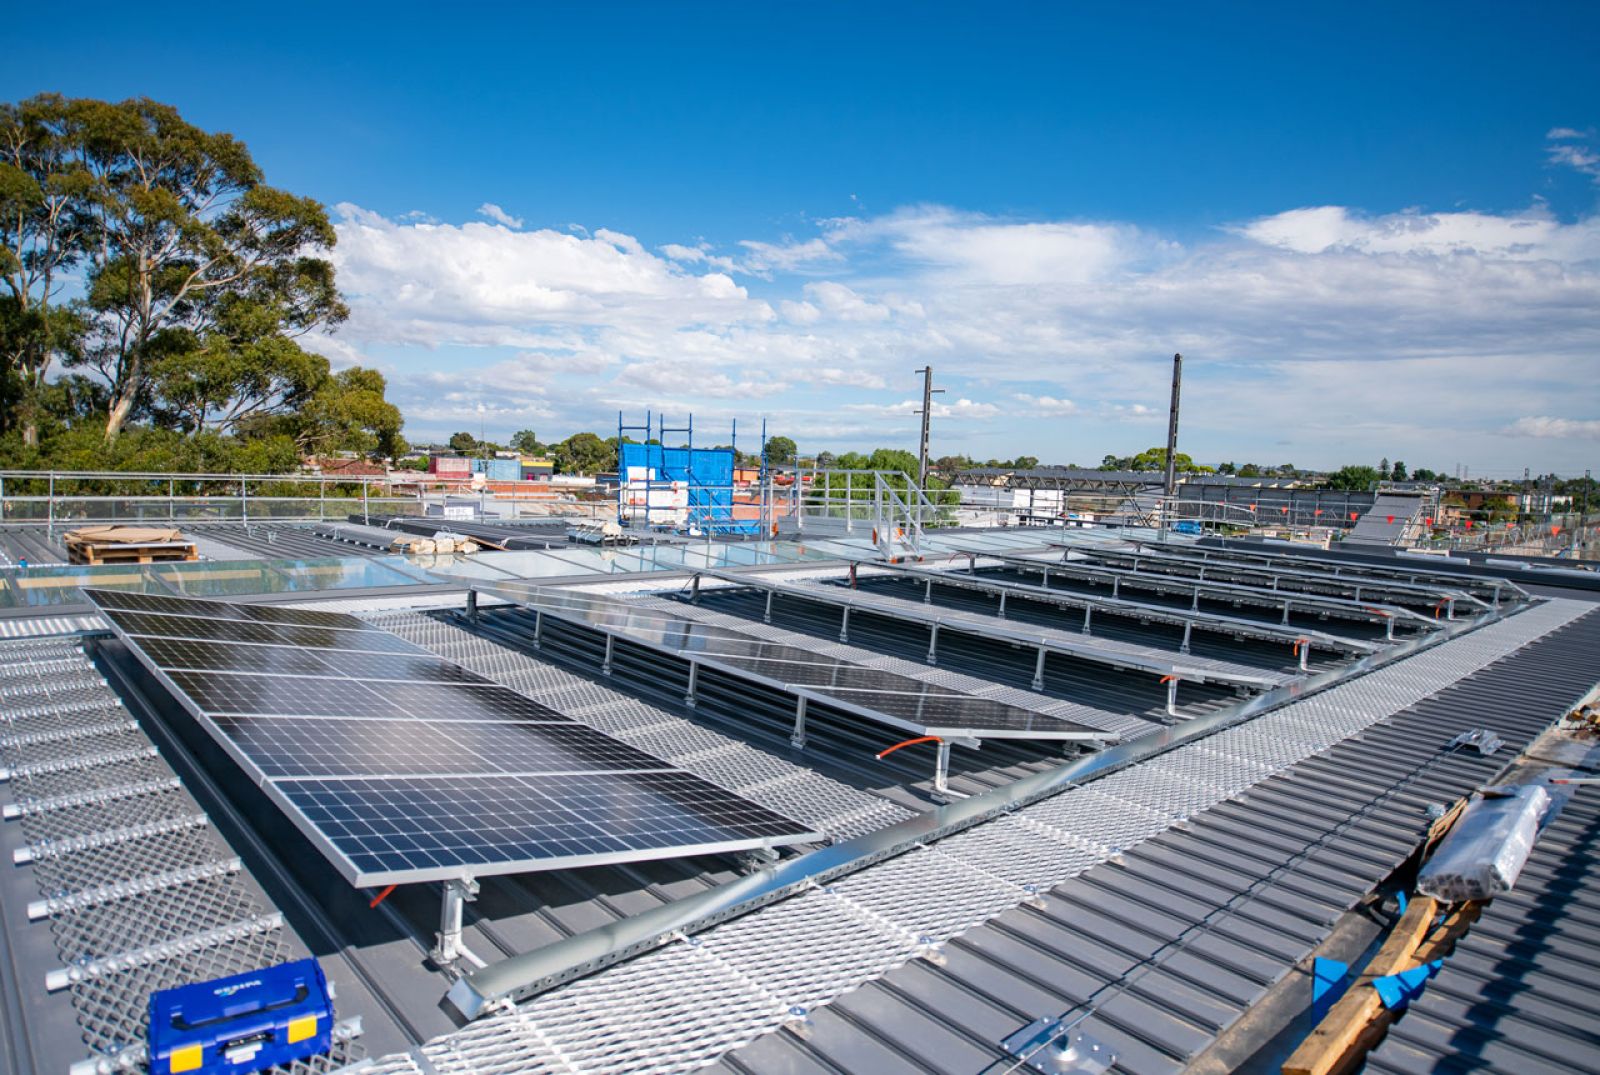 Solar panels on the roof at the new Glenroy Station.